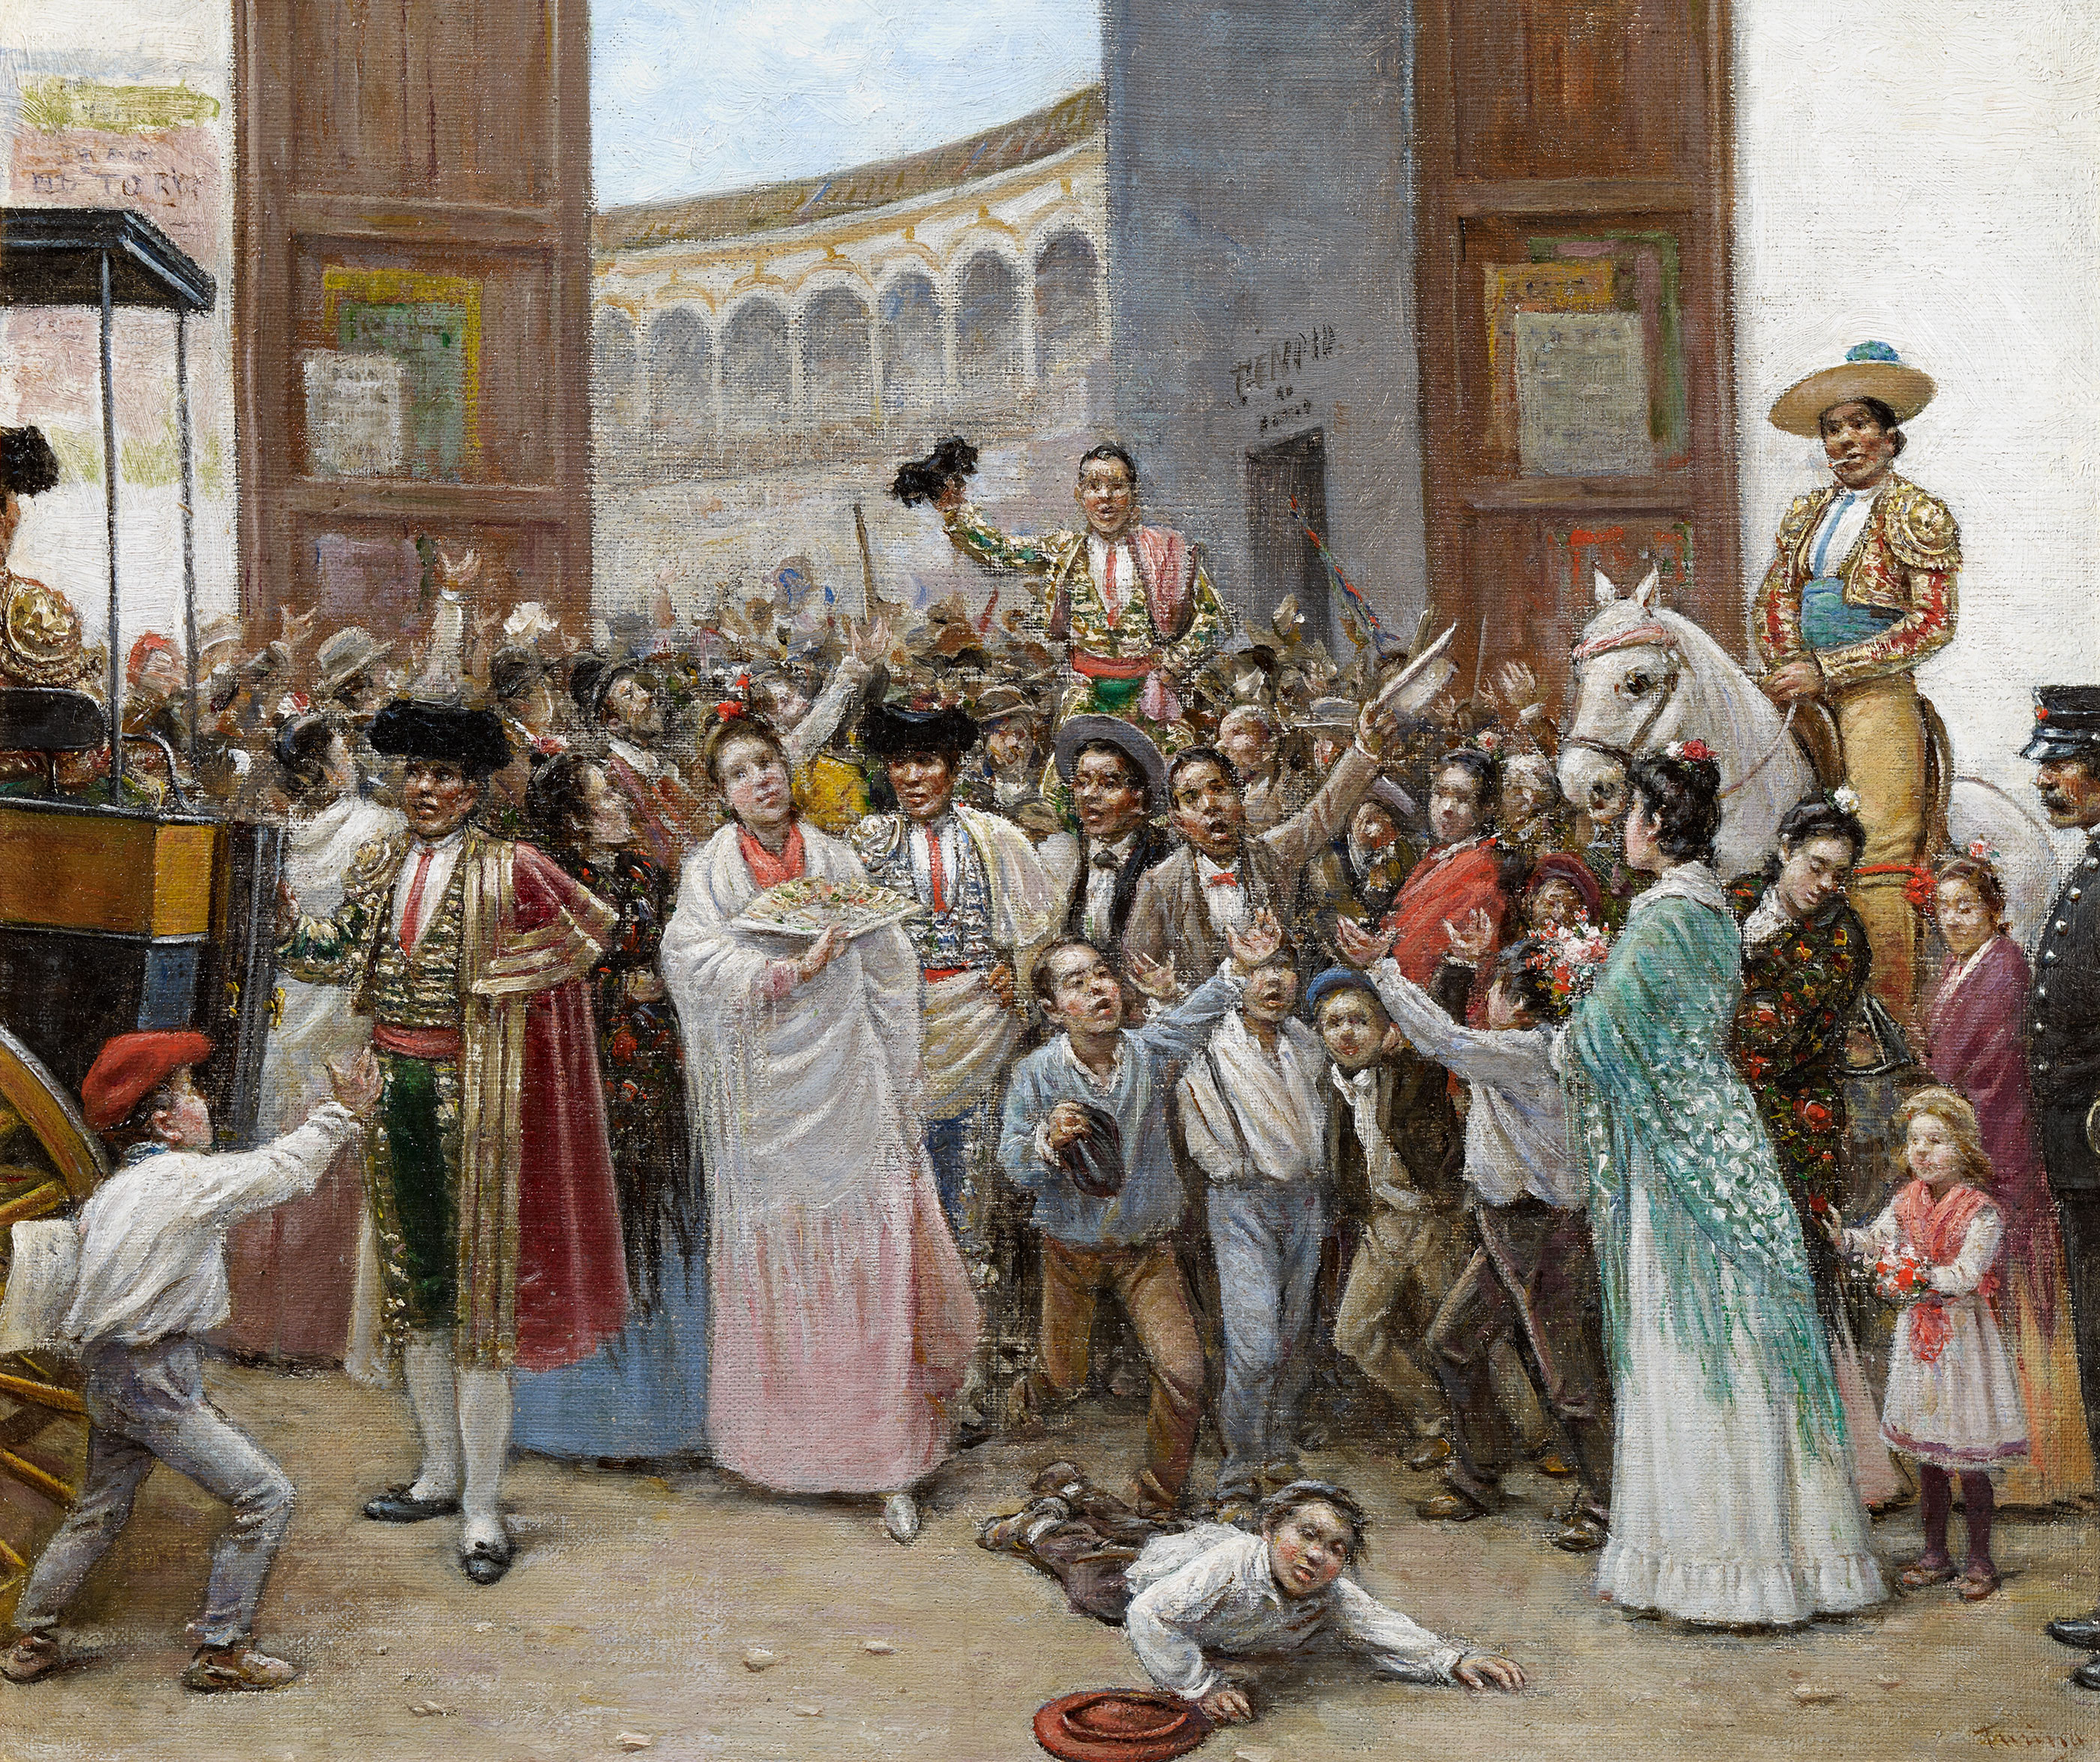 Triumphal Exit from the Maestranza Bullring in Seville